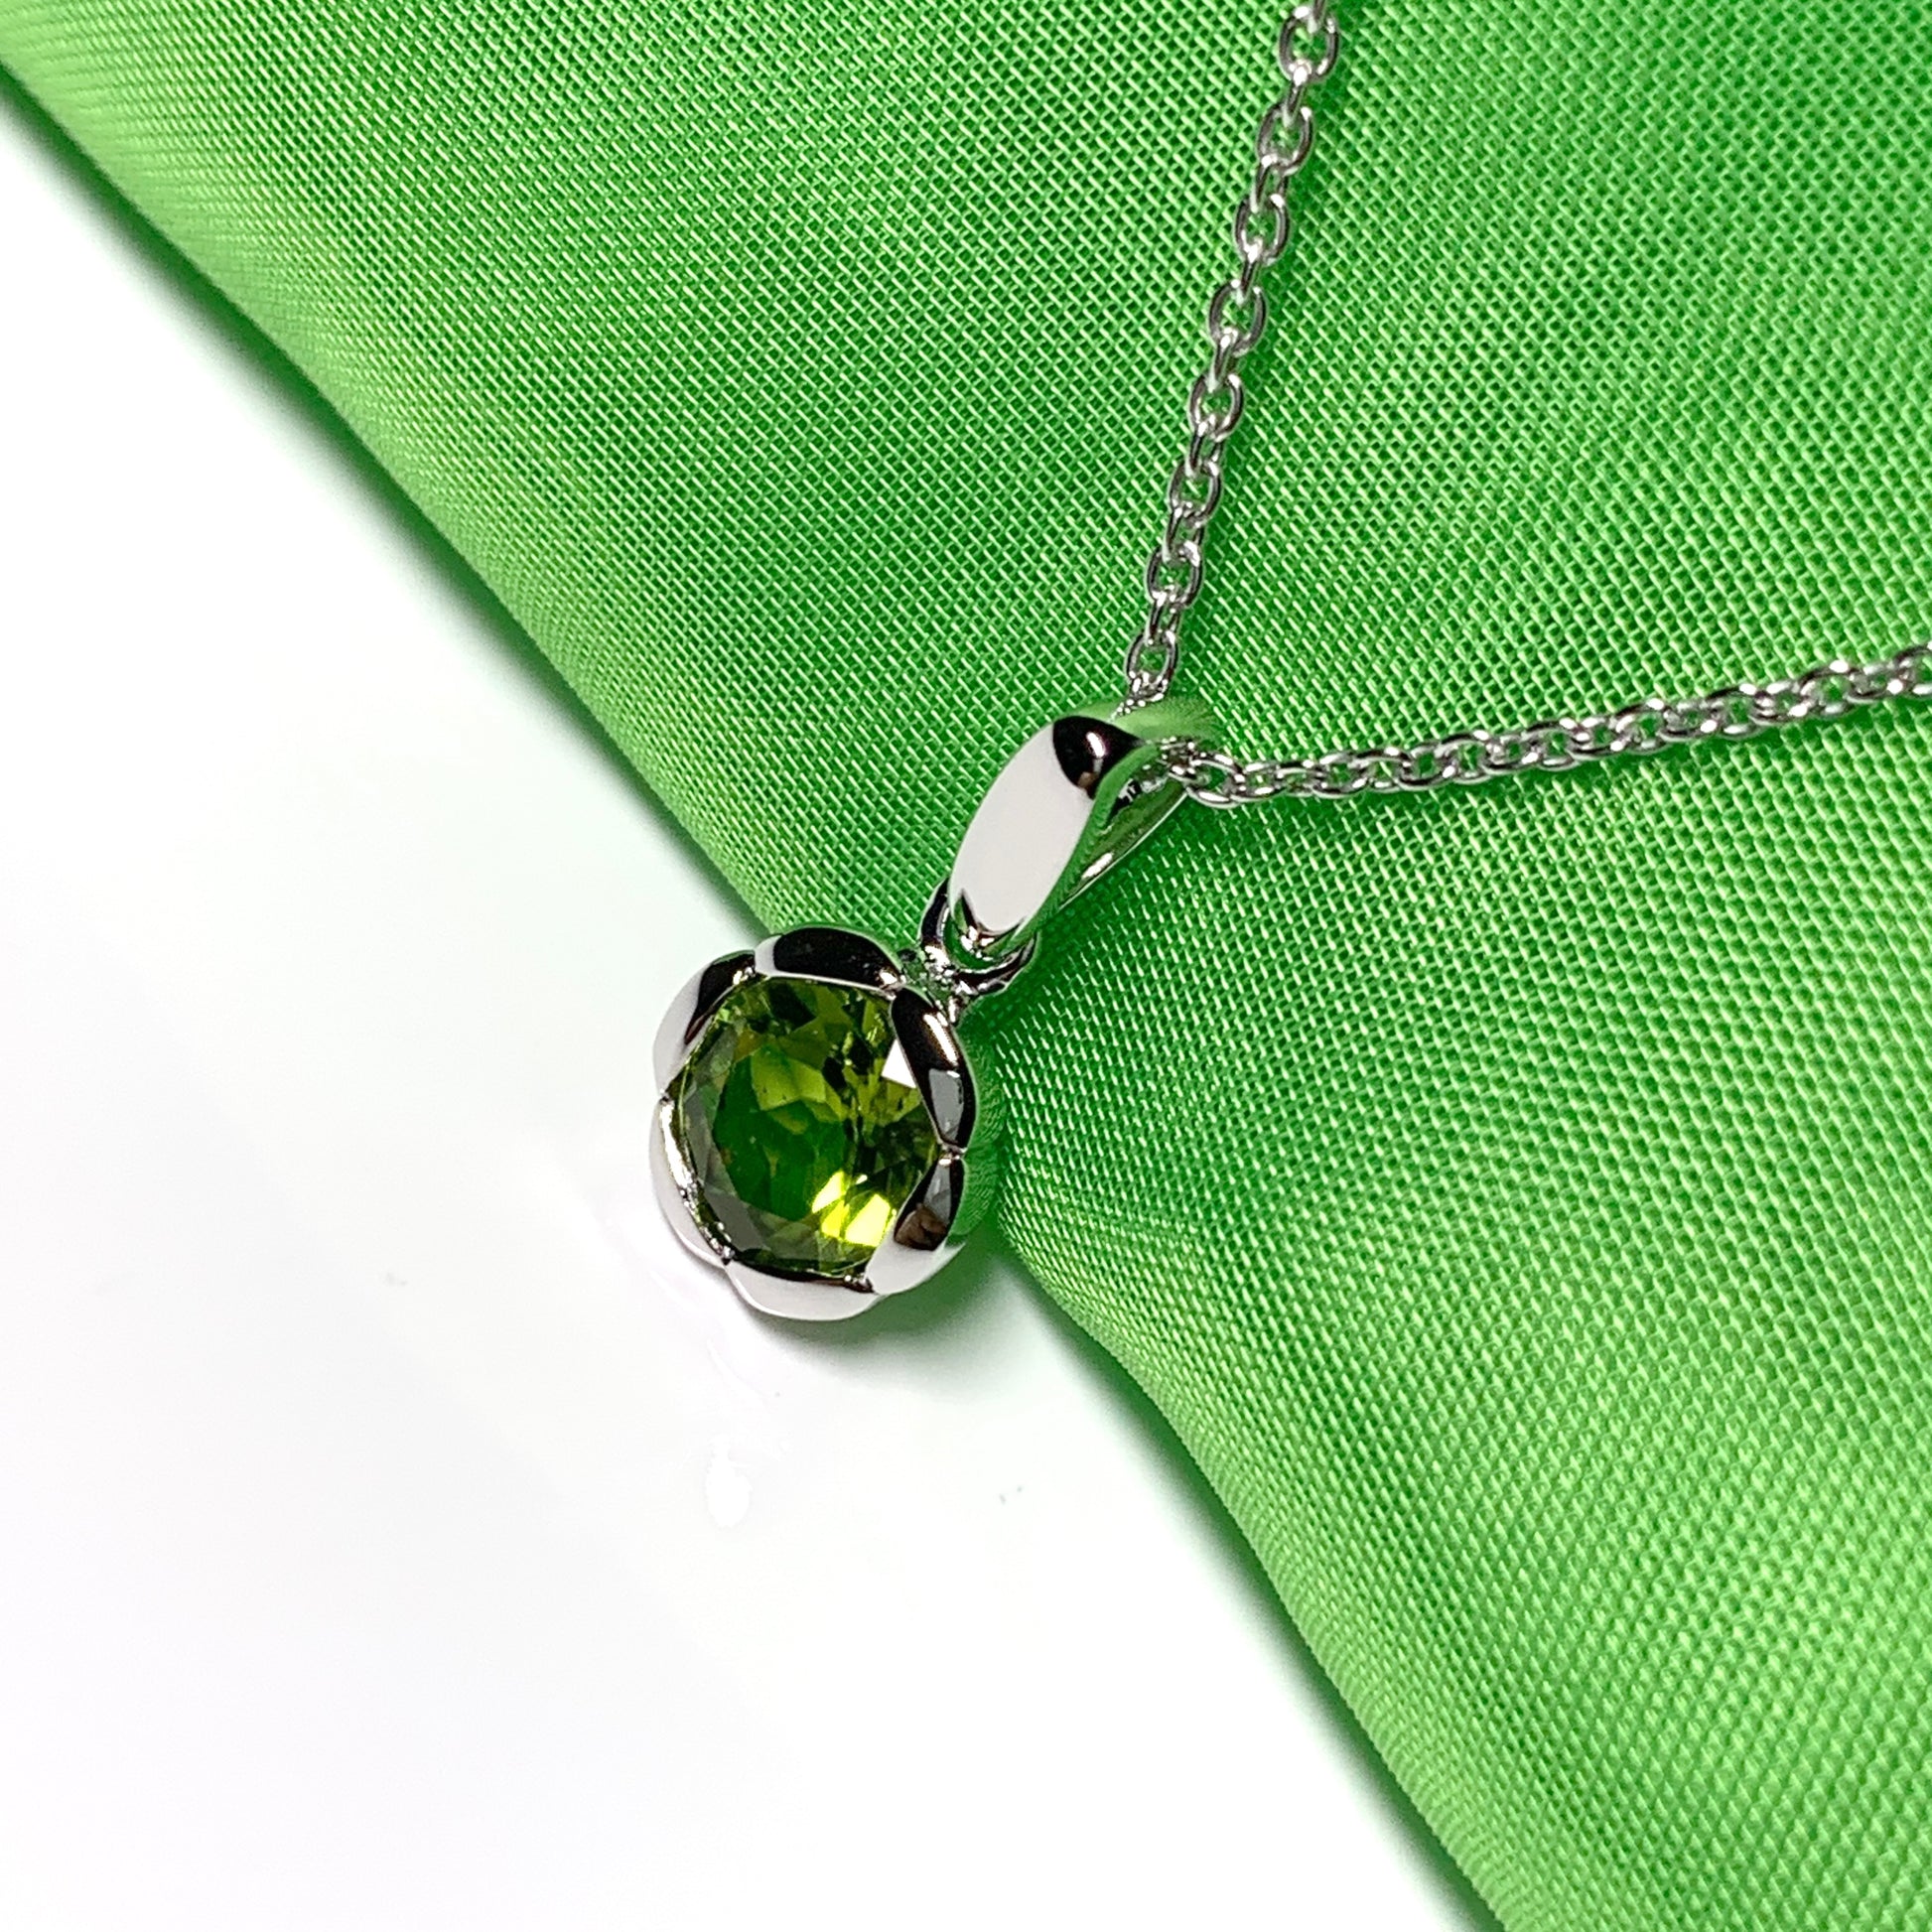 Real green peridot necklace fancy flower edged round